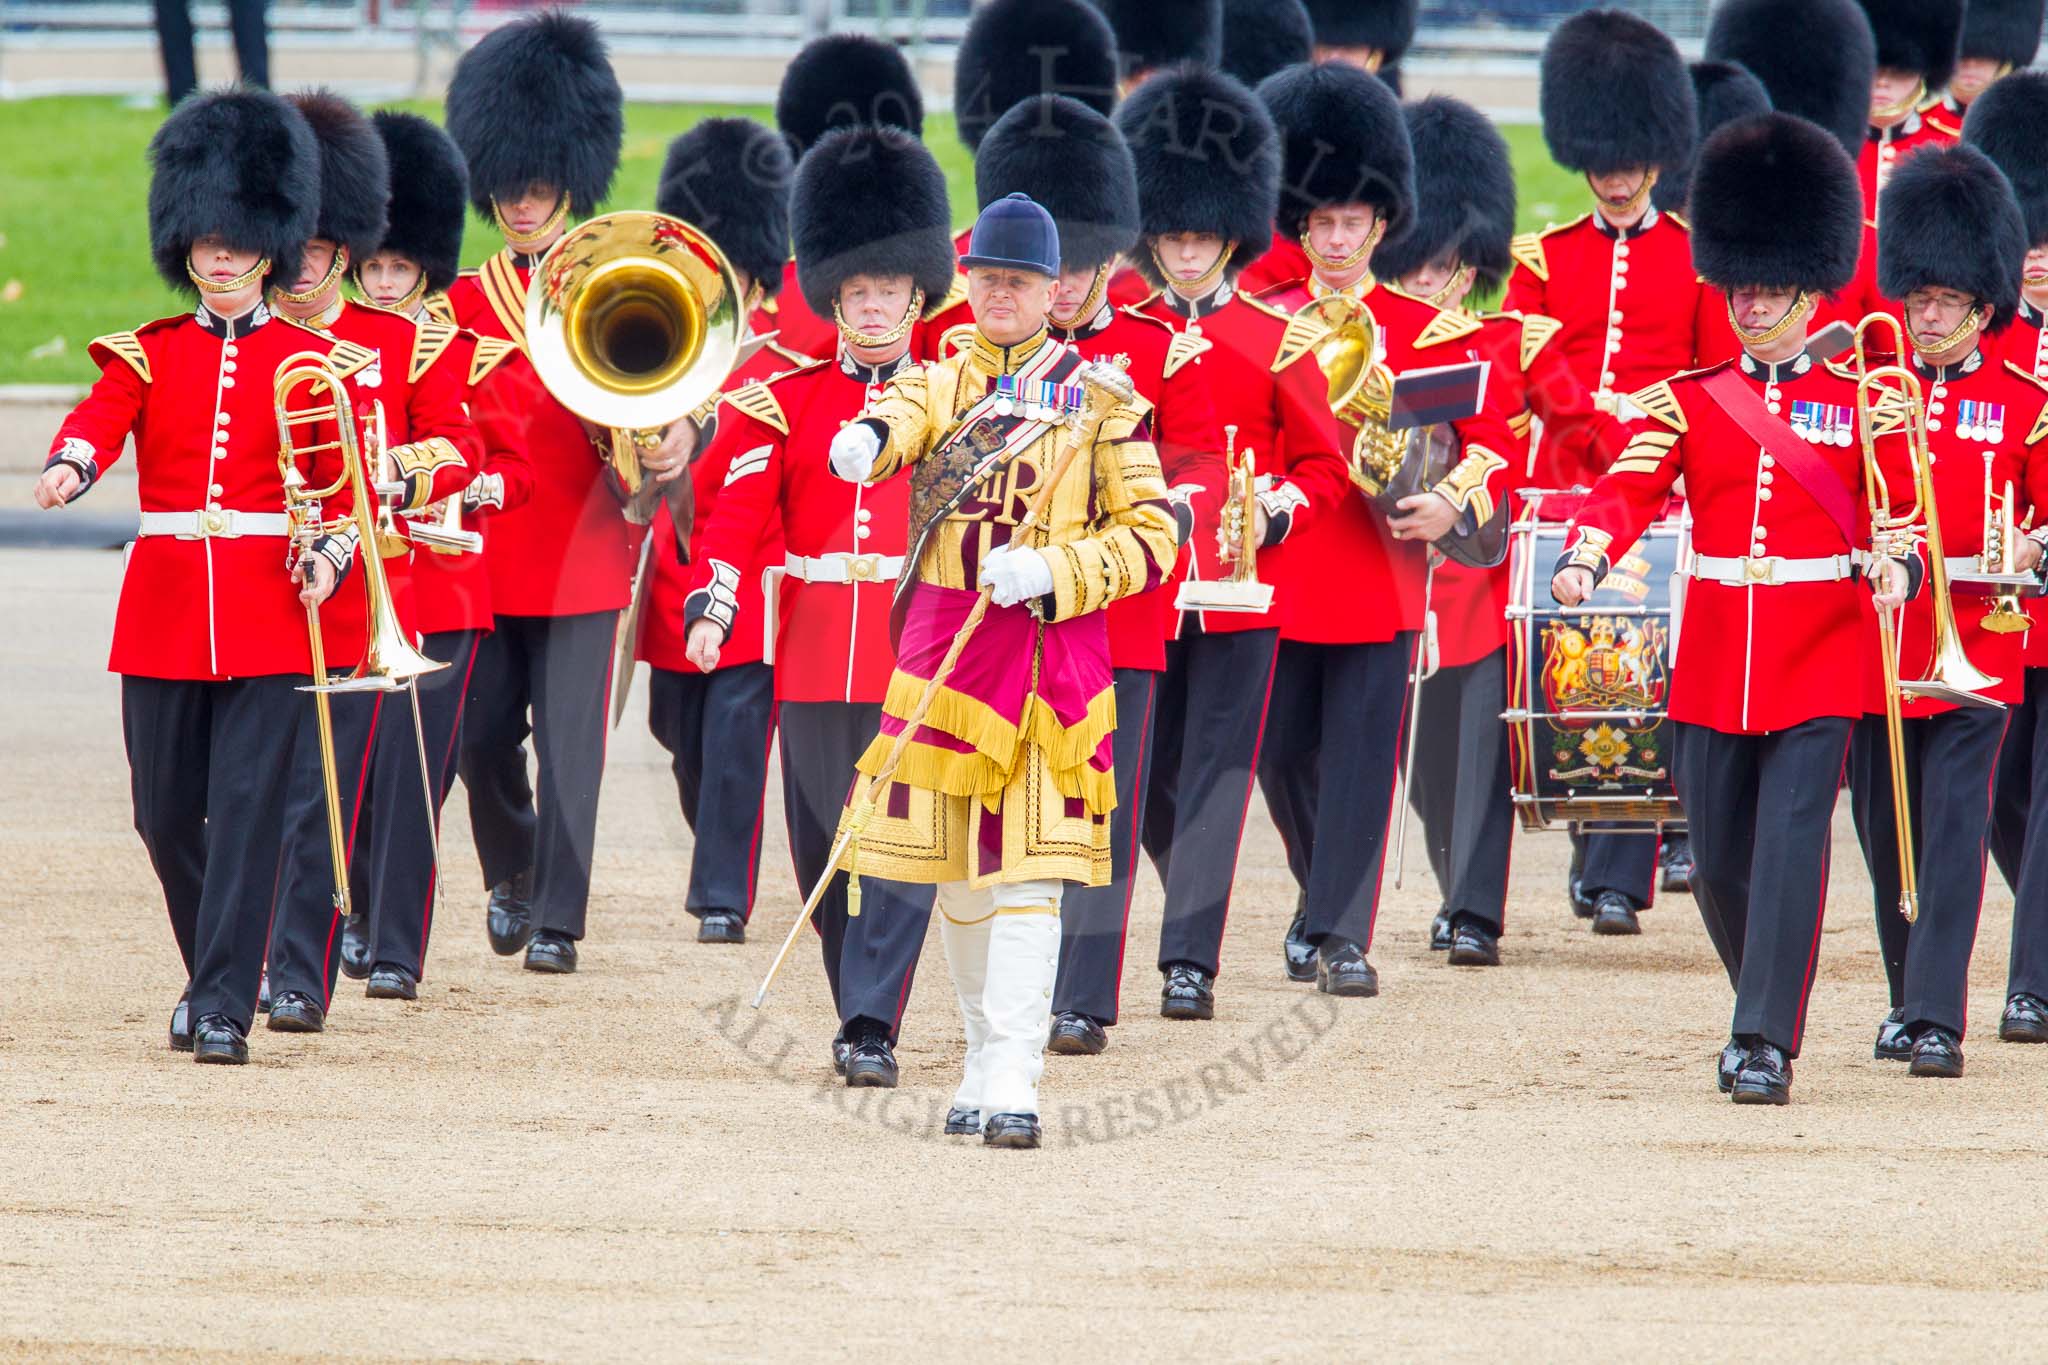 Trooping the Colour 2014.
Horse Guards Parade, Westminster,
London SW1A,

United Kingdom,
on 14 June 2014 at 10:25, image #133